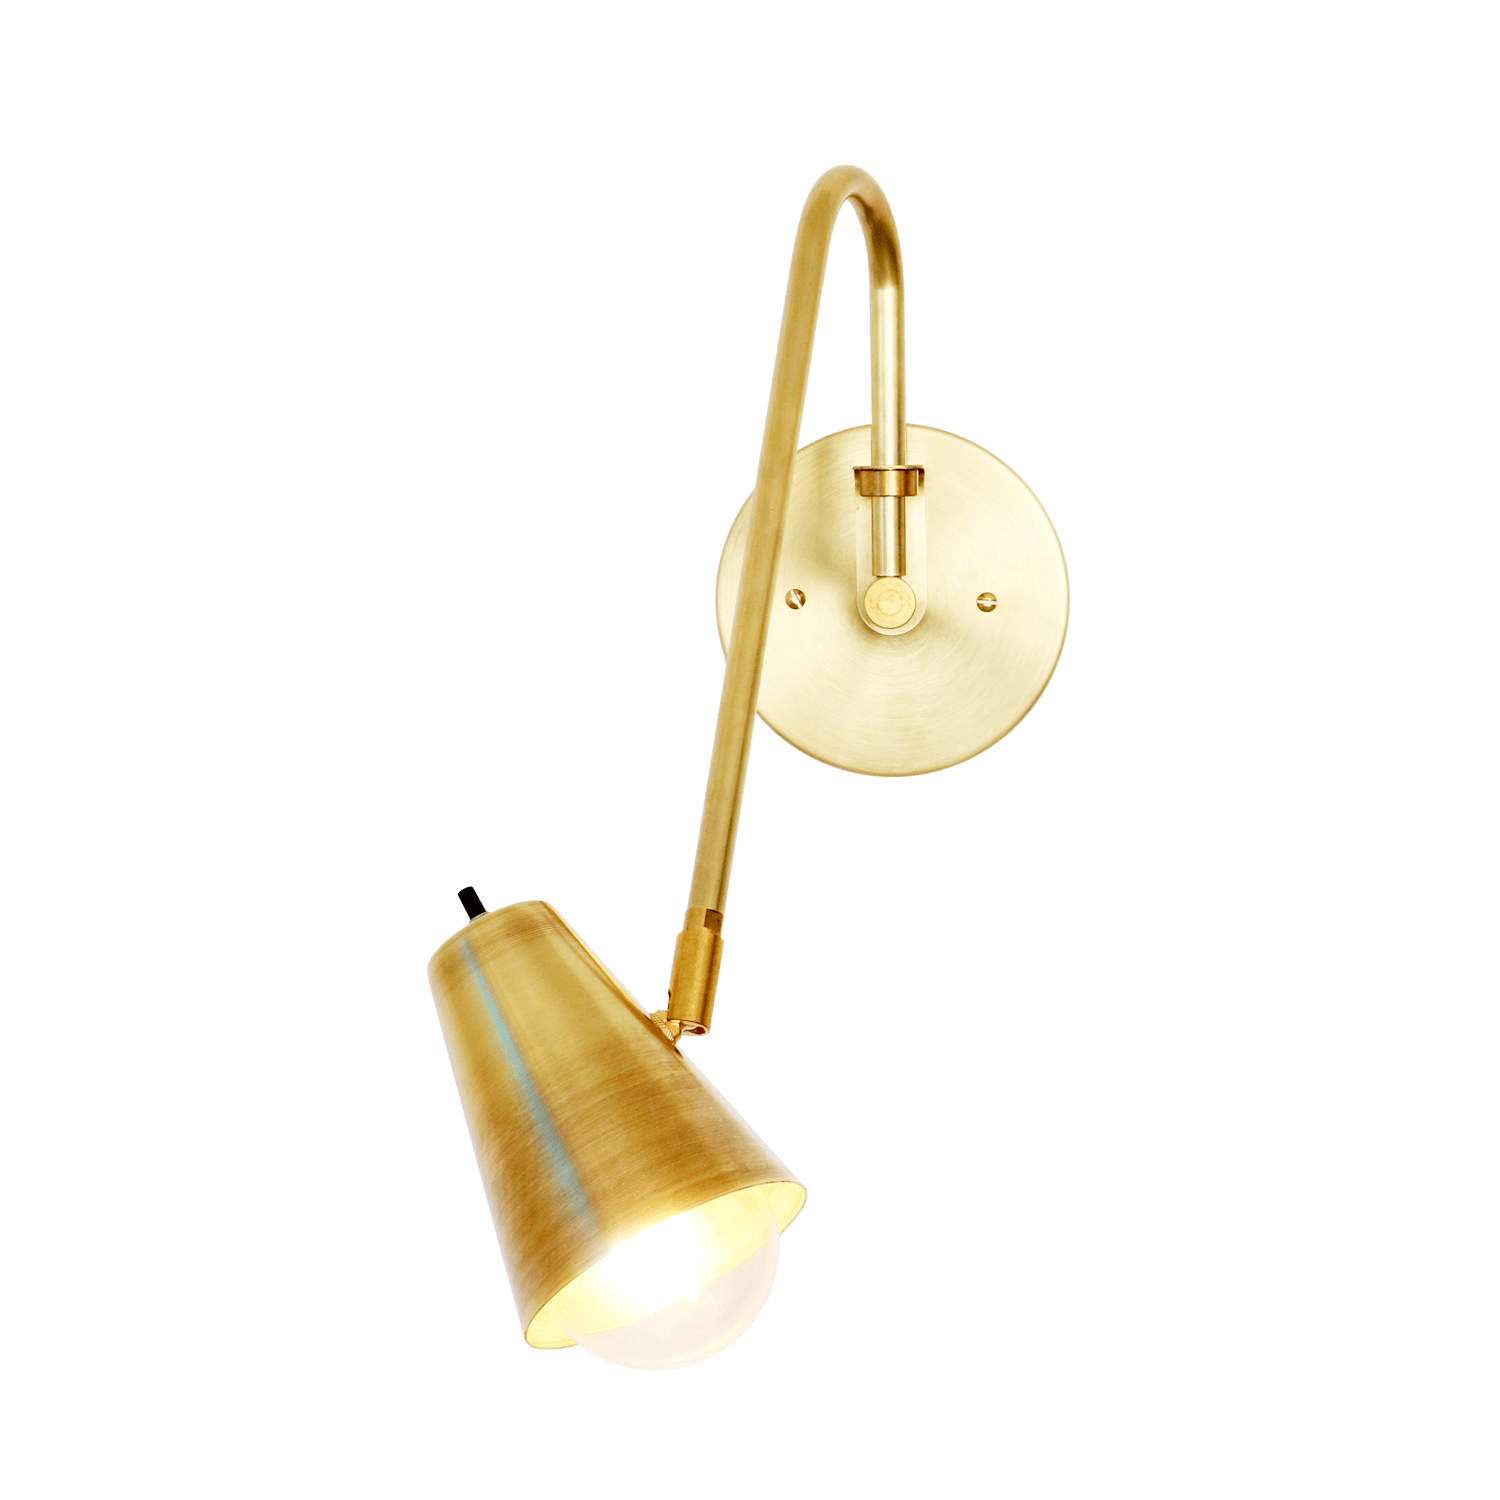 Hardwired Wallace lamp Brass lamp / Brass shade / Brass hardware onefortythree